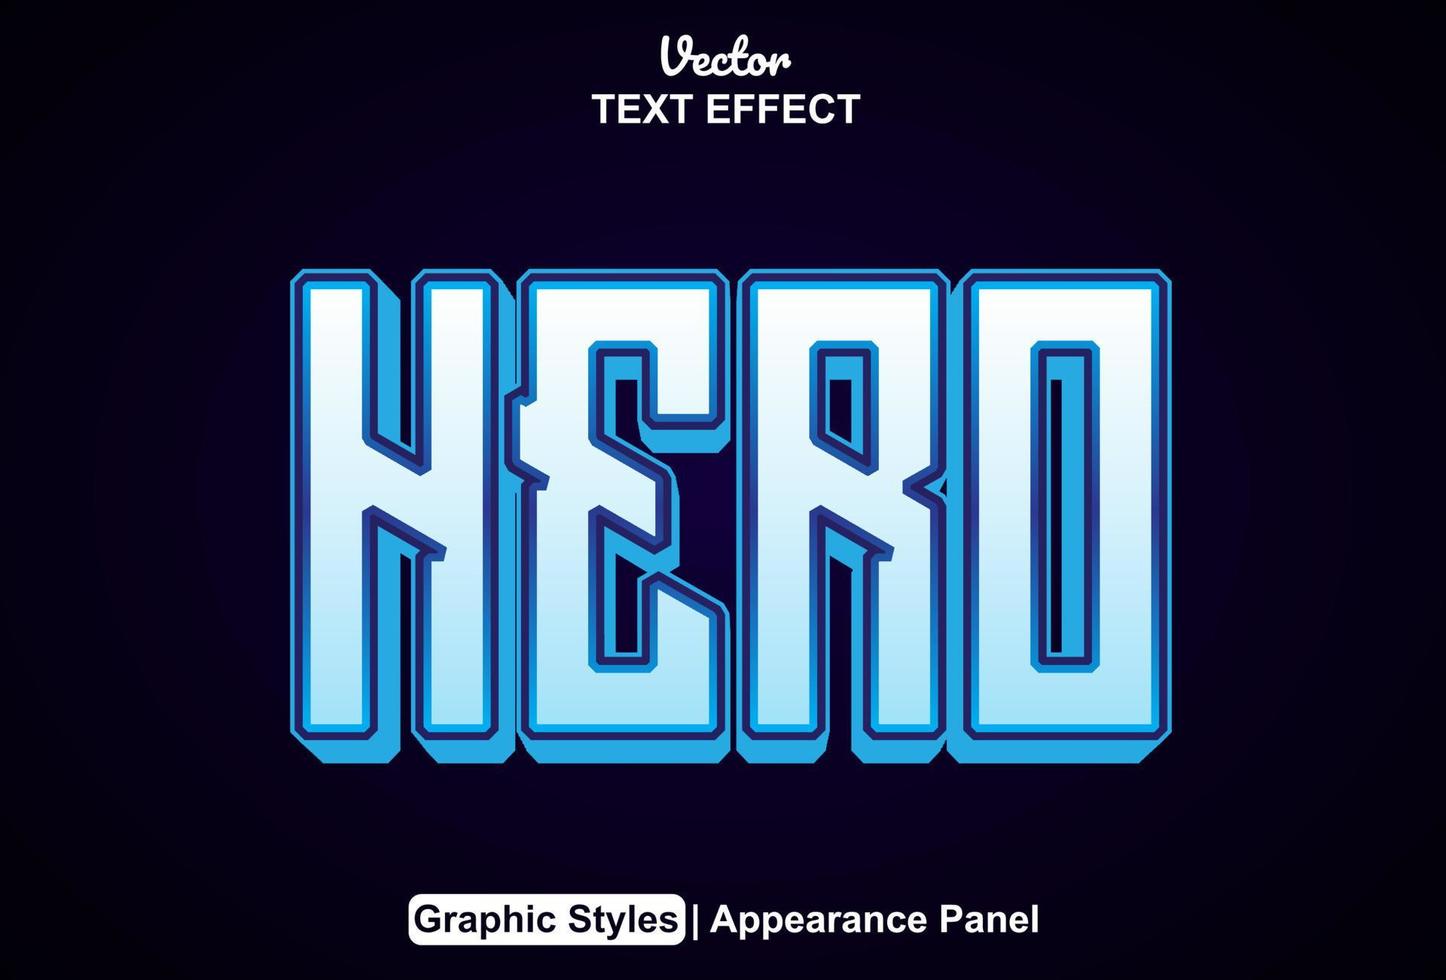 hero text effect with graphic style and editable. vector